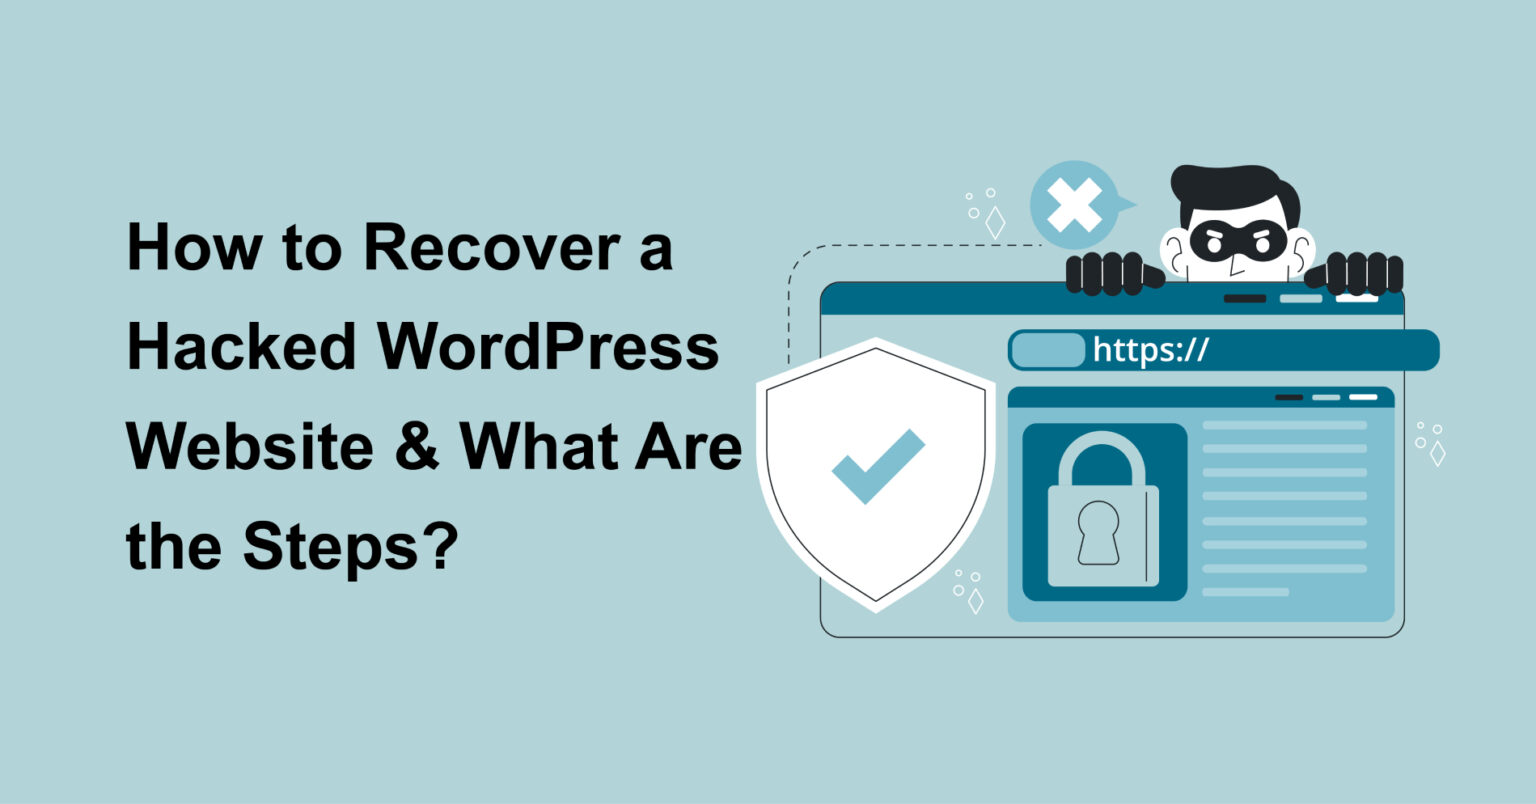 How to Recover a Hacked WordPress Website & What Are the Steps?